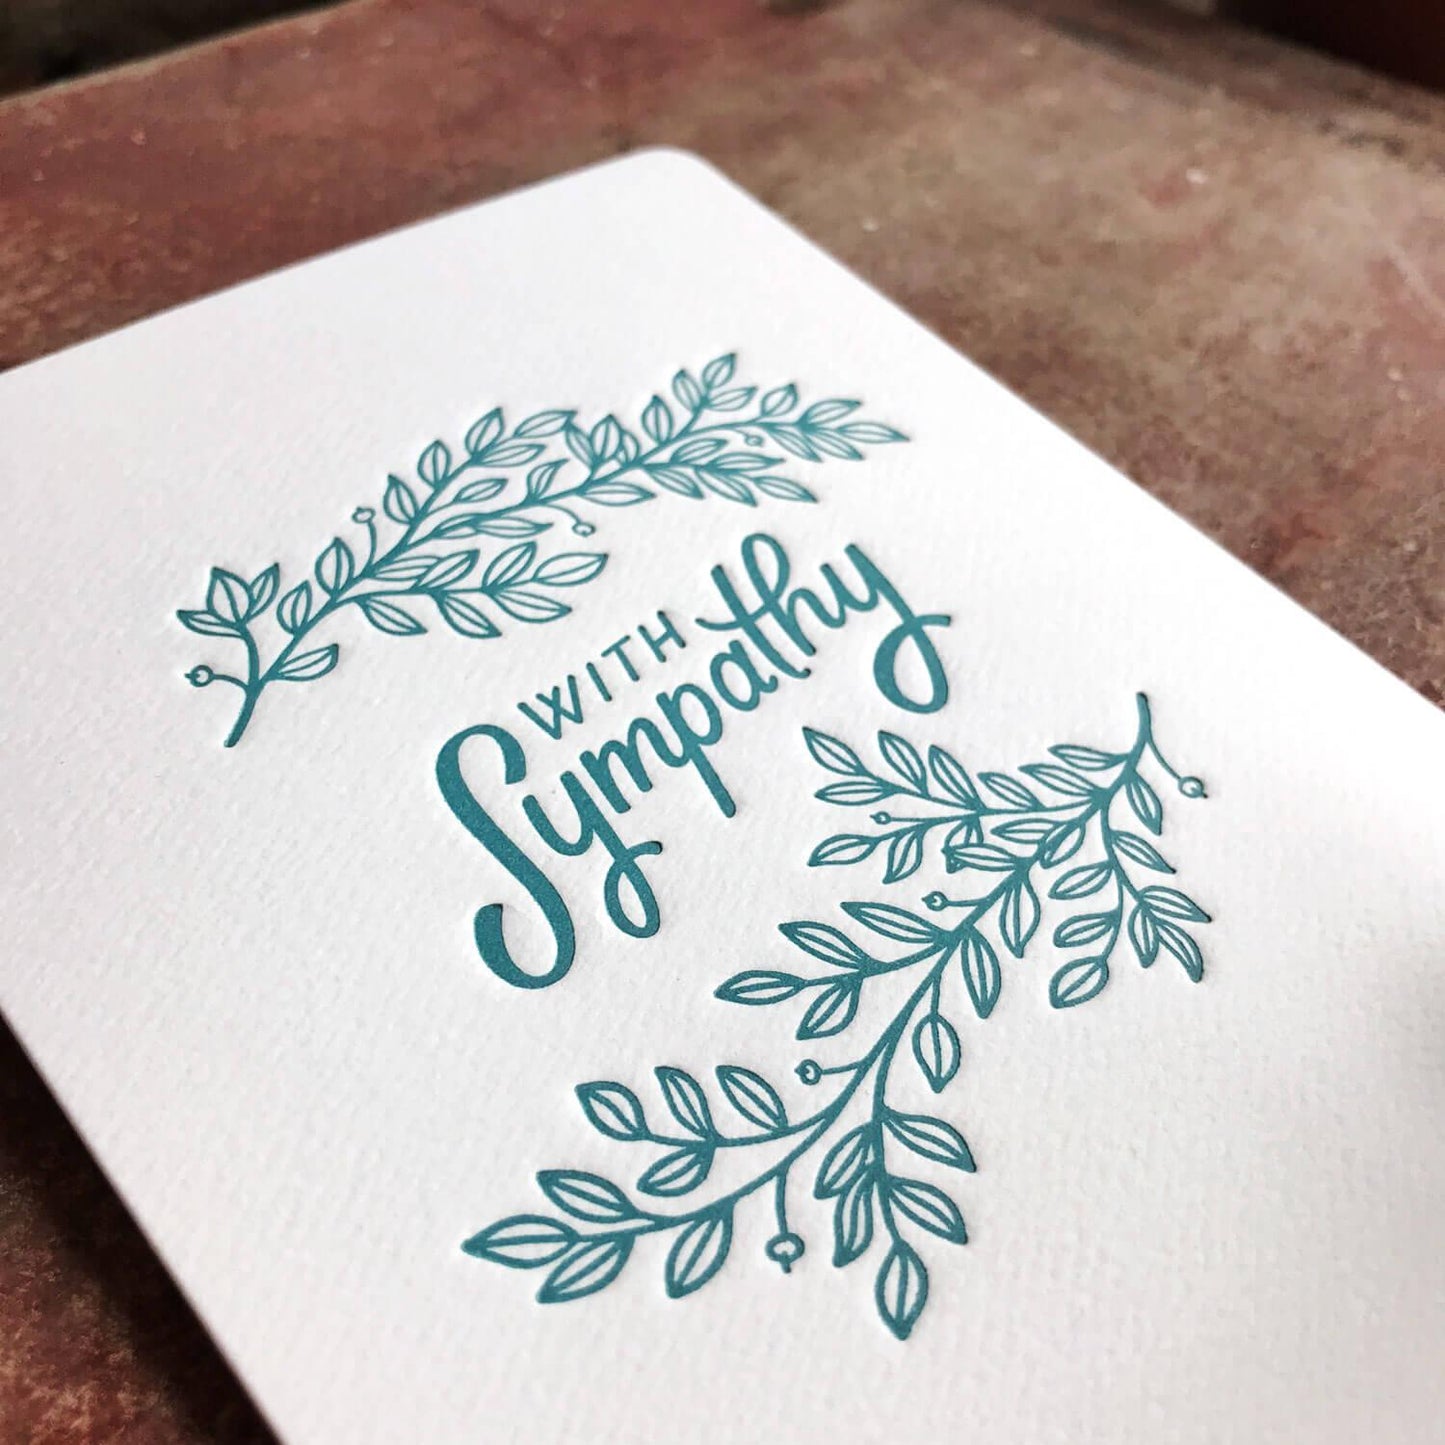 A sympathy card with teal lettering and leaf designs on a white background.Order online for event items from the best florist in Toronto near you.